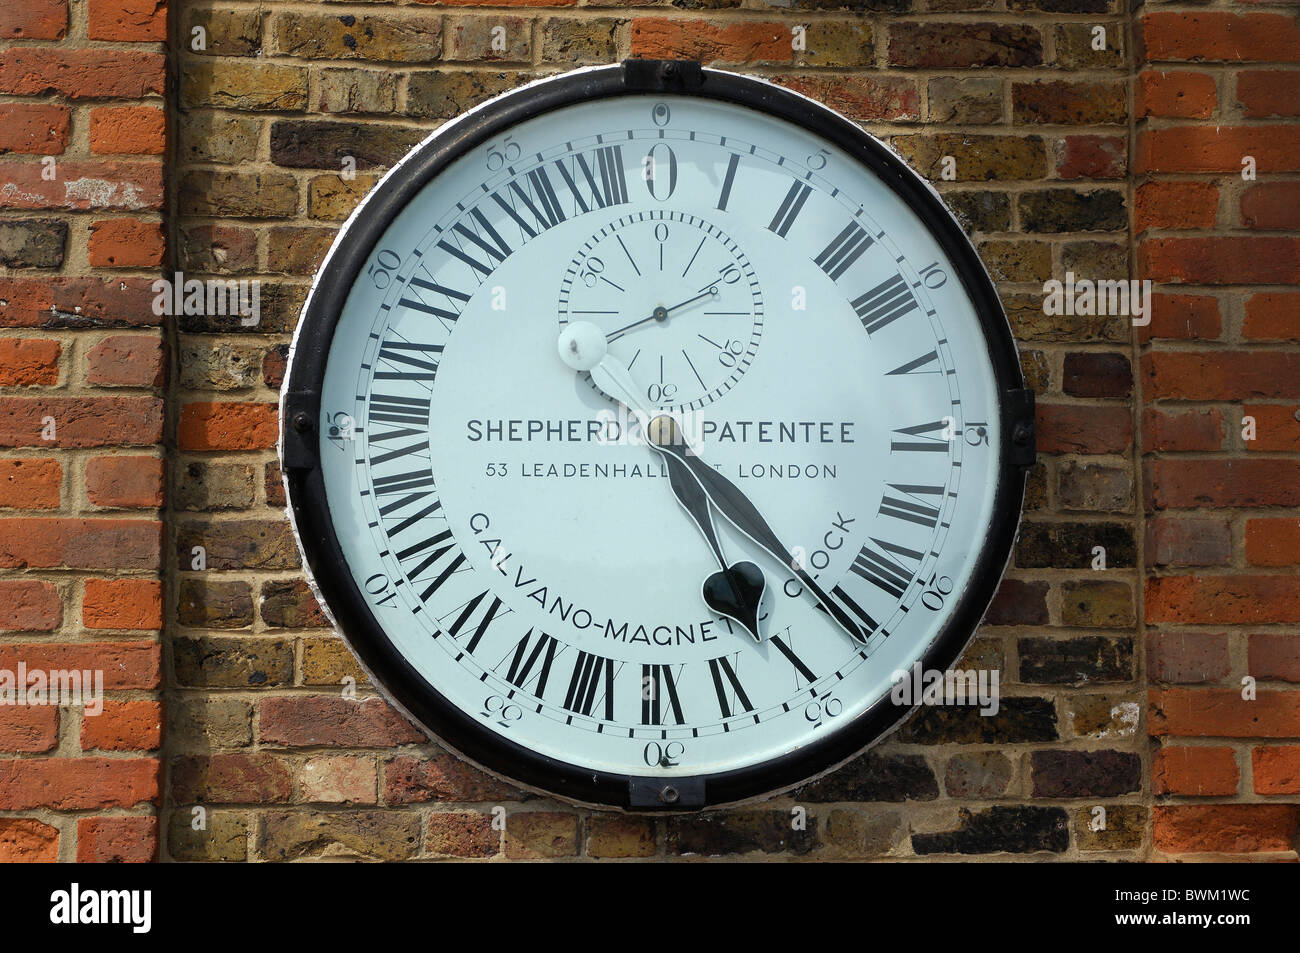 UK London Greenwich Time Clock Royal Greenwich Observatory Greenwich Great Britain Europe England world time Stock Photo